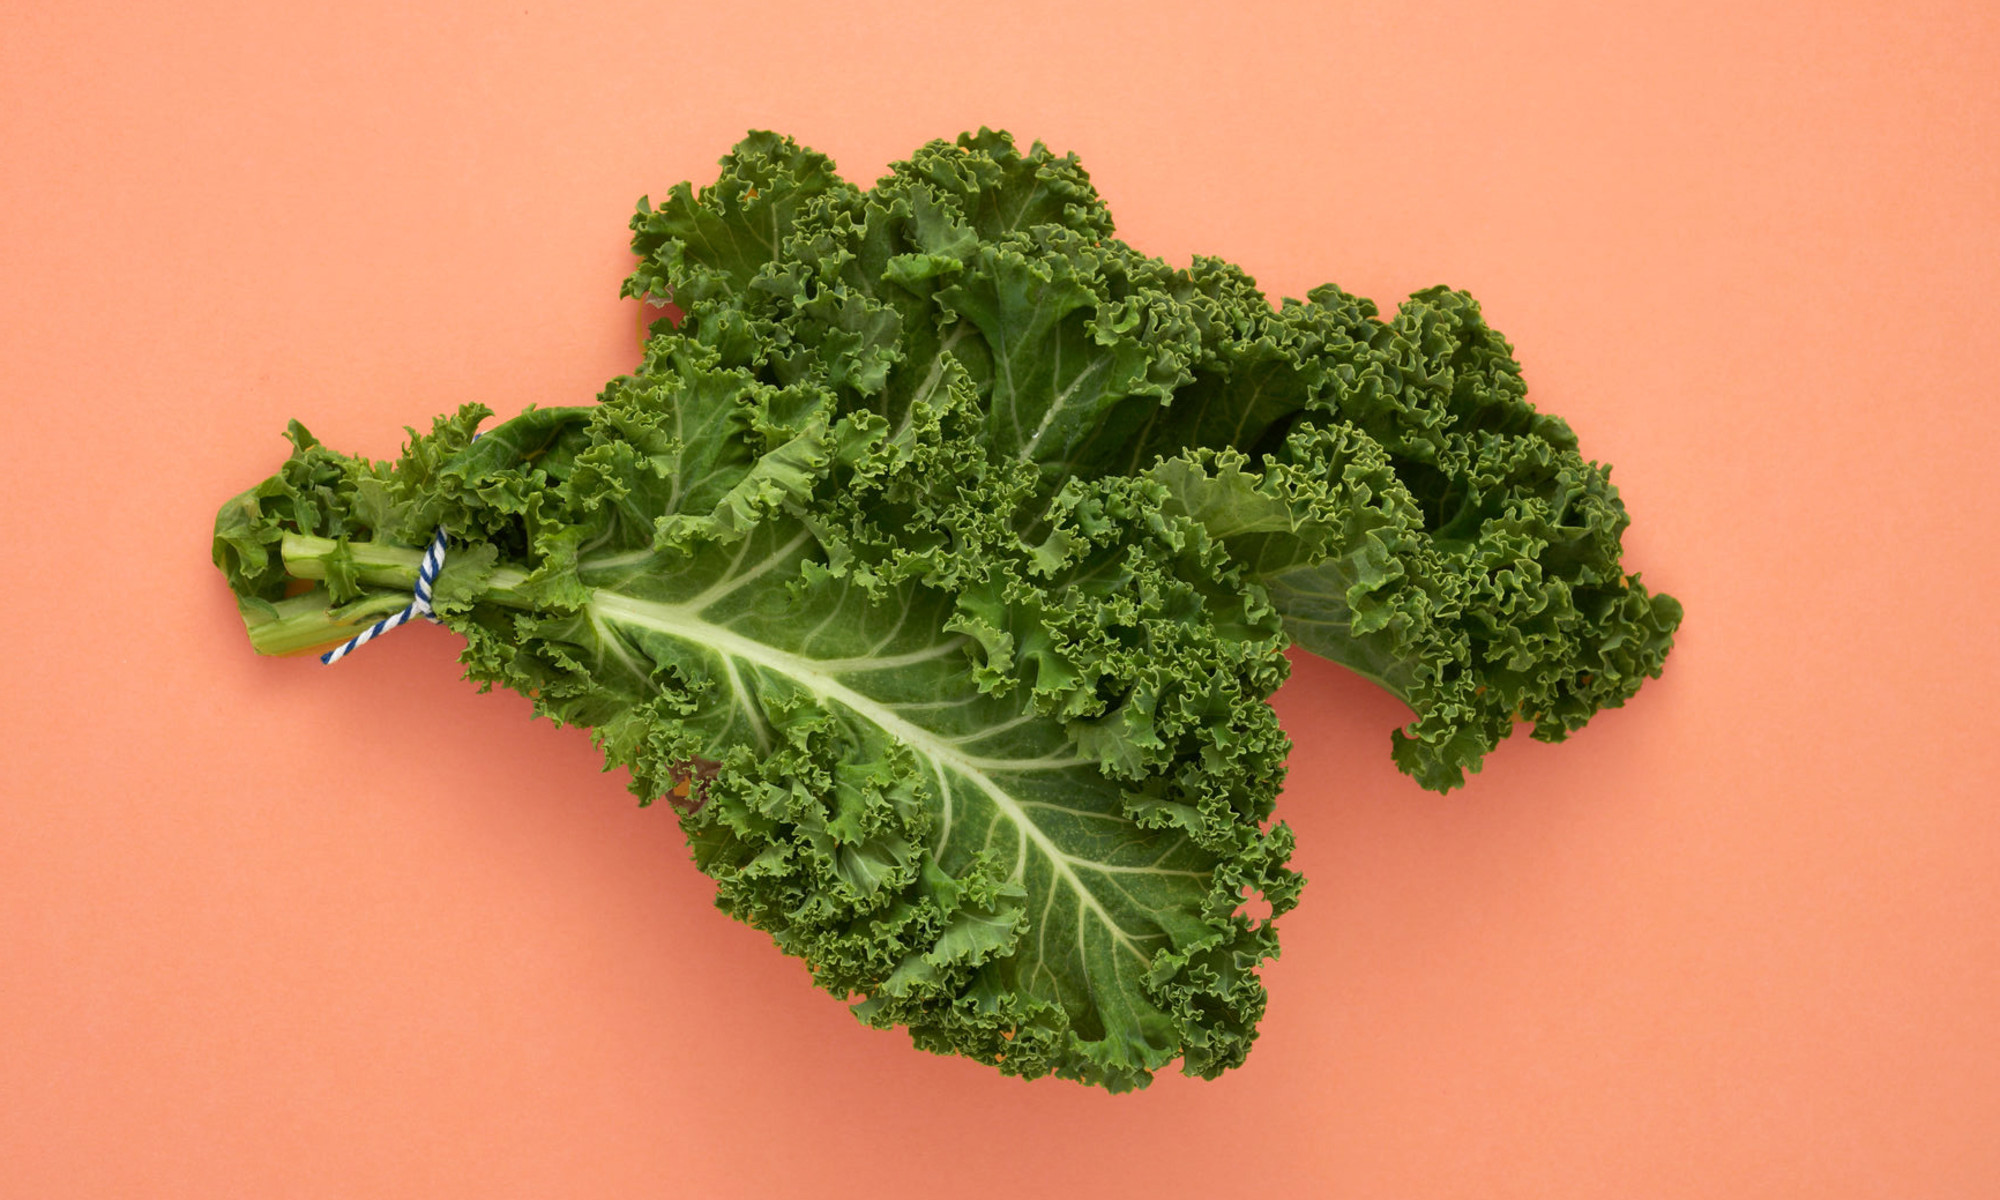 Is Kale Potentially Toxic? Here's Everything You Need To Know